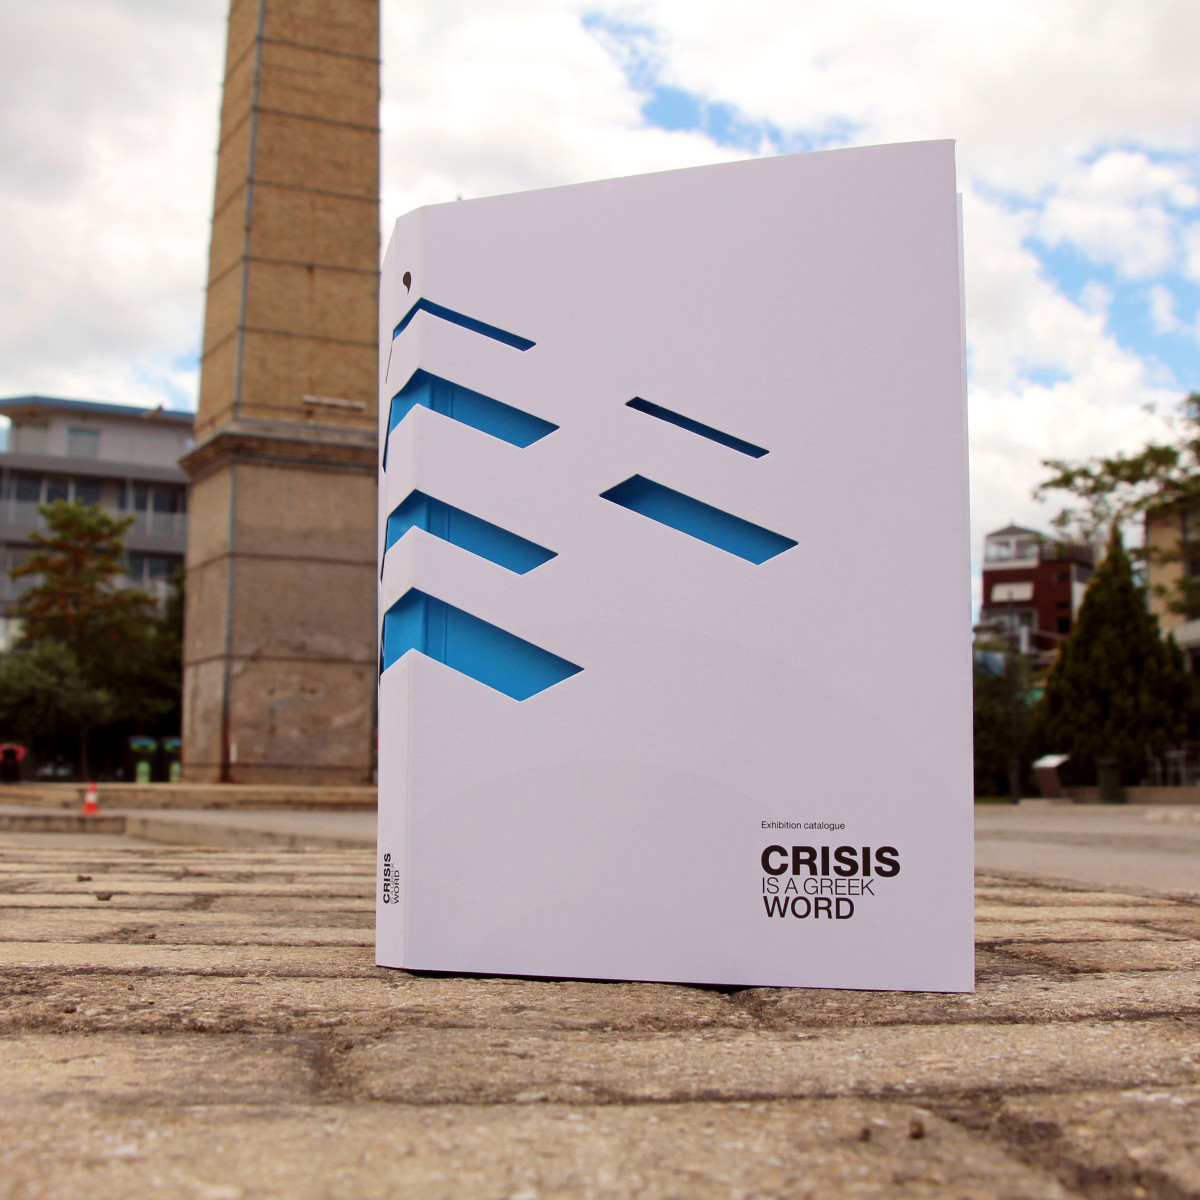 Crisis is a Greek word <b>Exhibition Catalogue